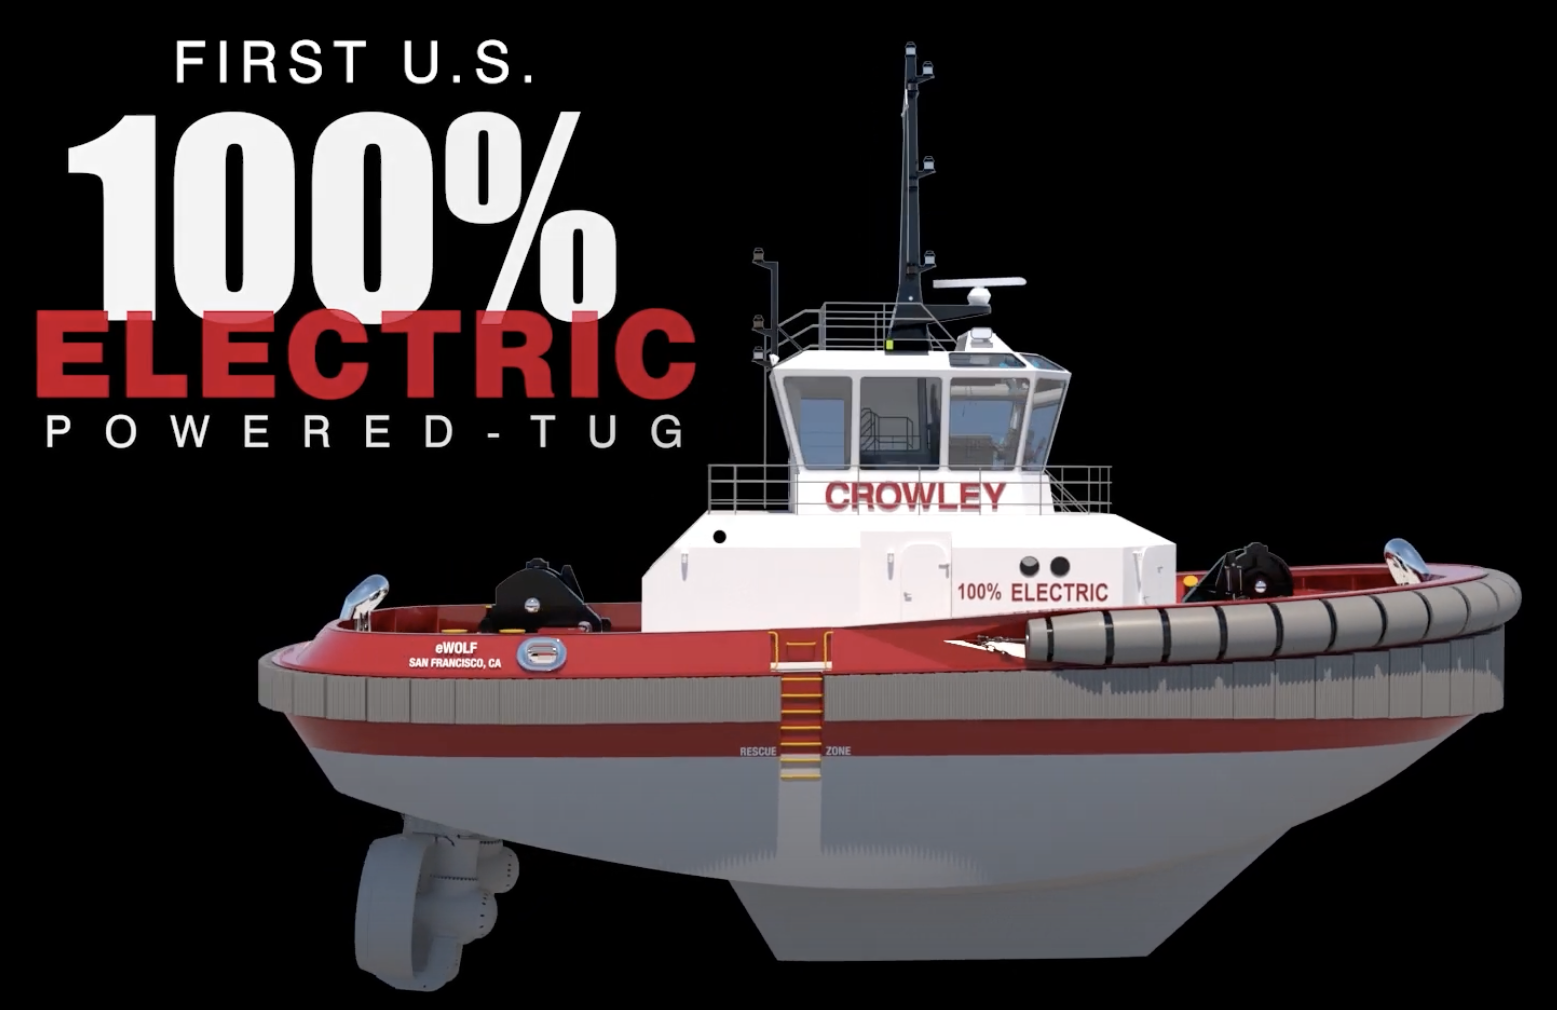 Crowley to Build, Operate First Fully Electric U.S. Tugboat